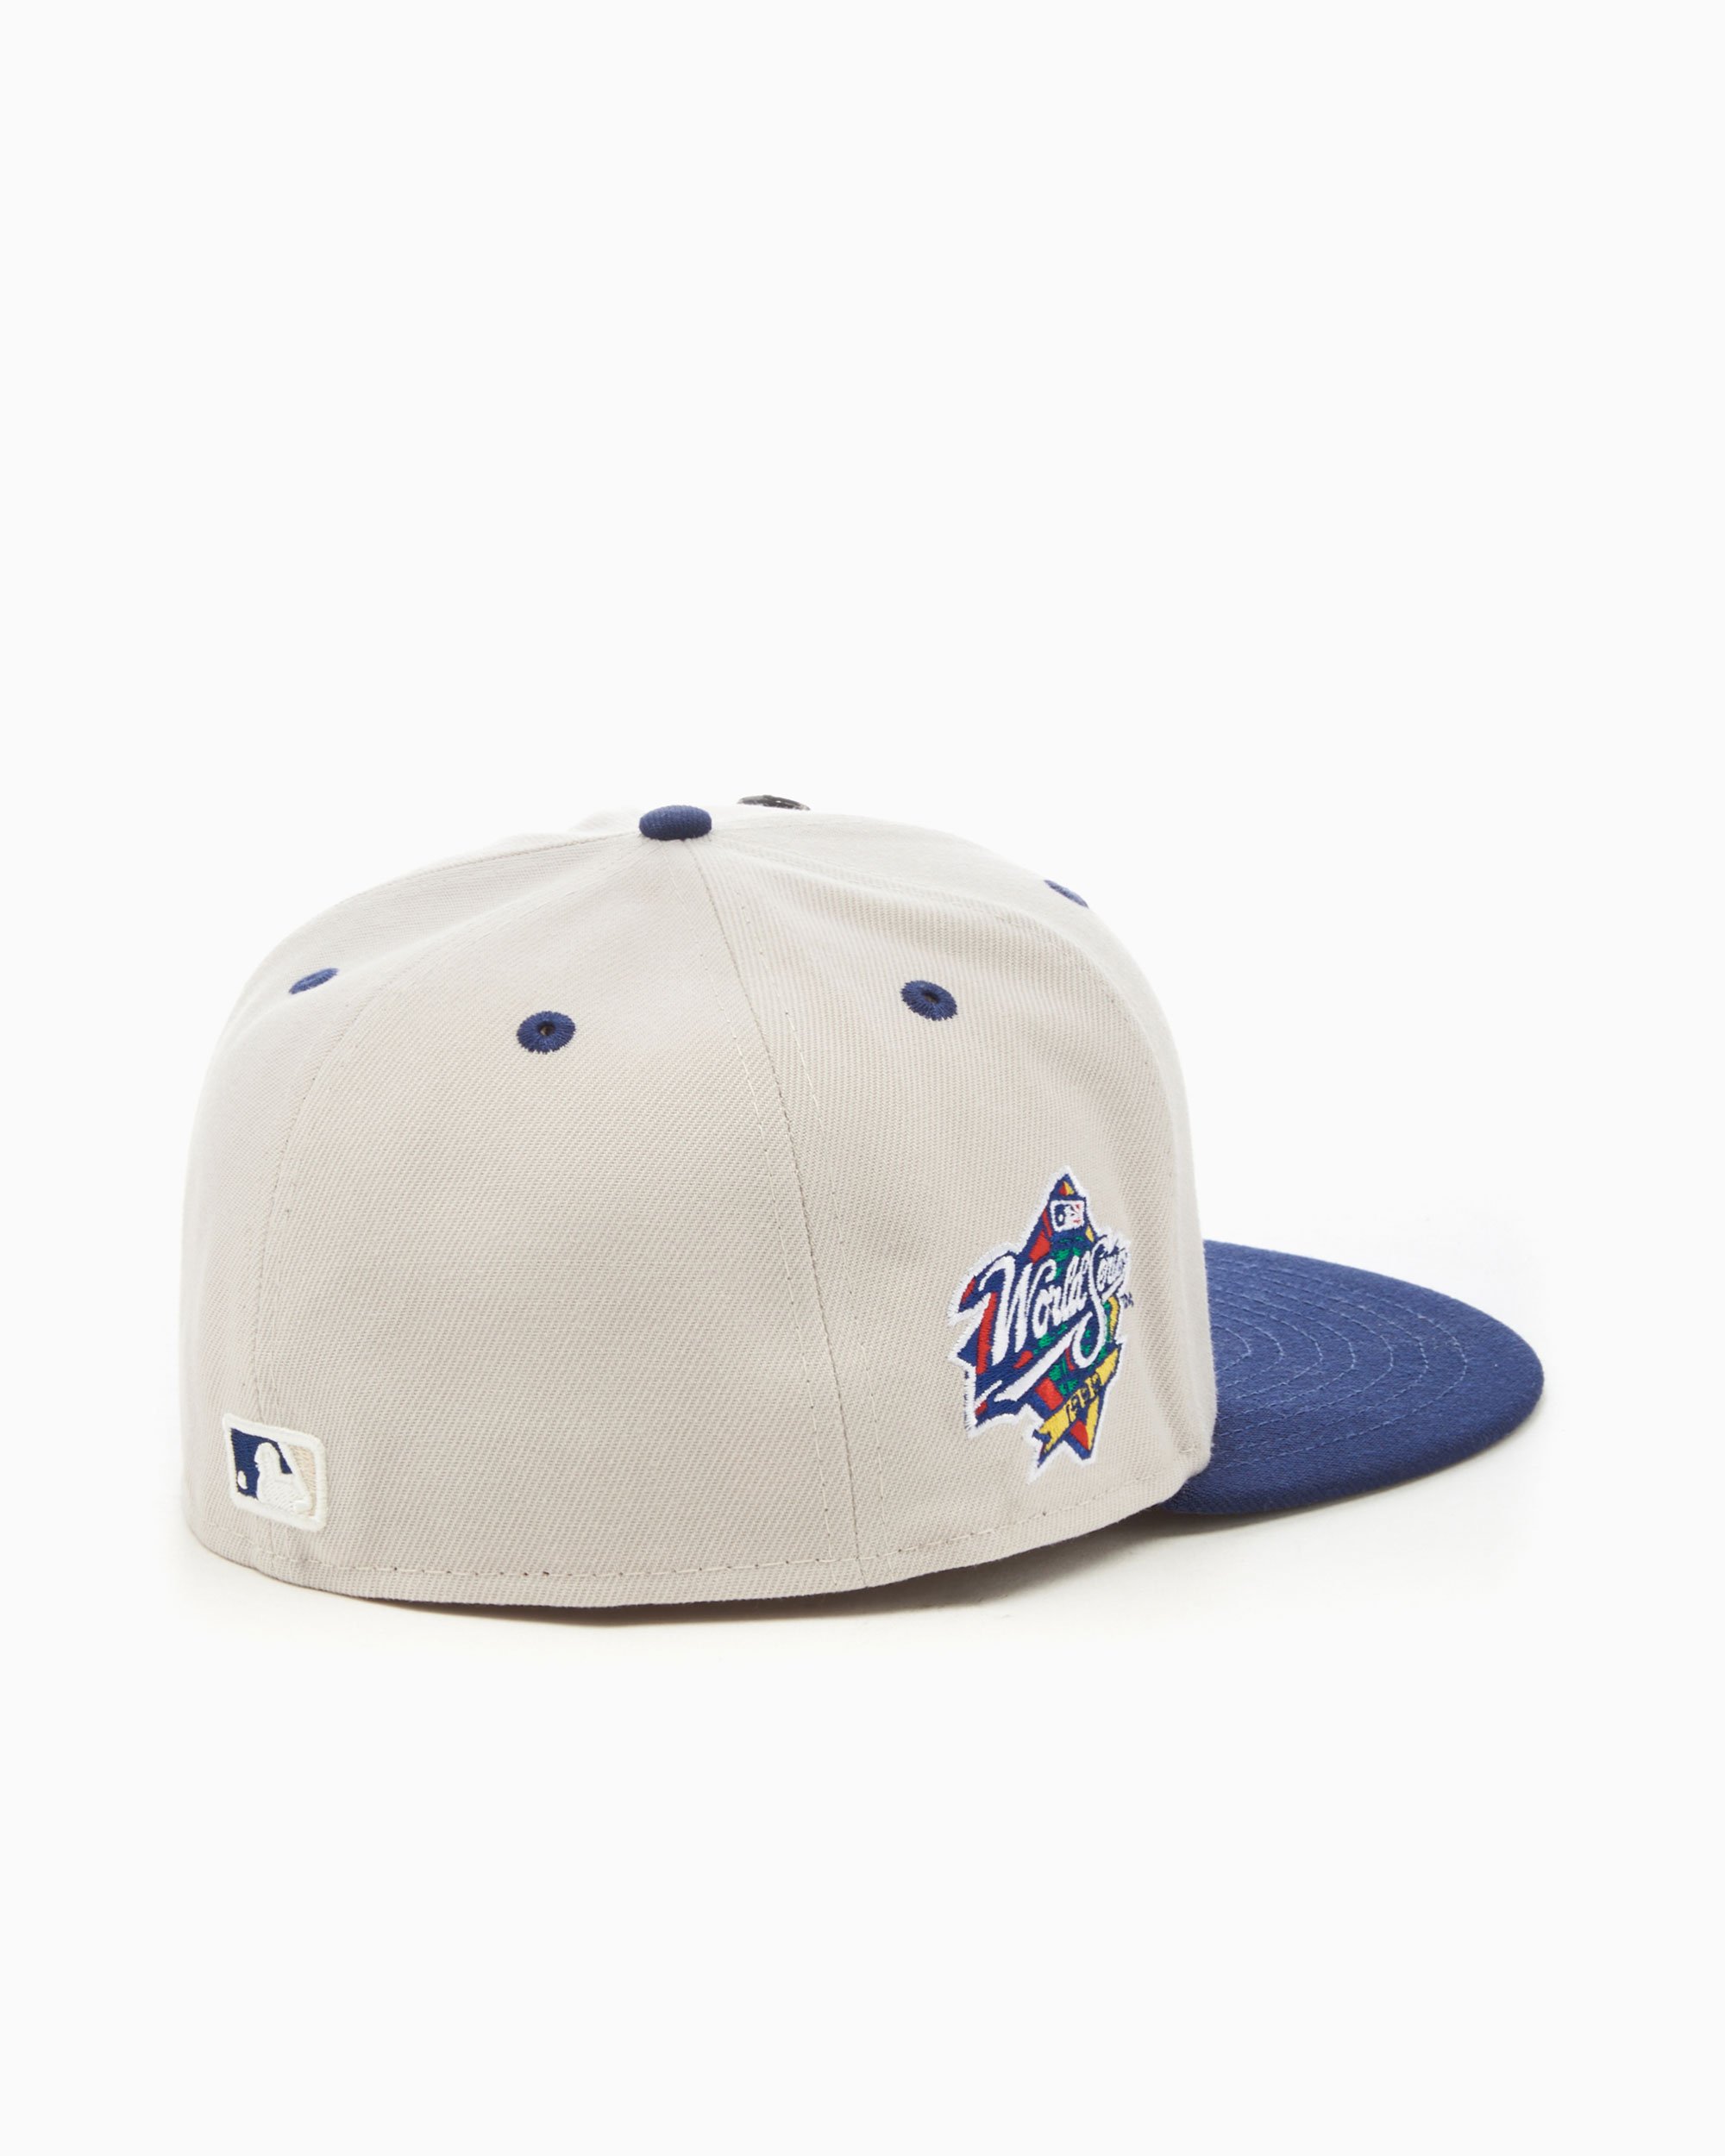 Online New MLB World Gray York Cap FOOTDISTRICT Buy Series Yankees 59FIFTY Fitted at 60357993| Era New Unisex